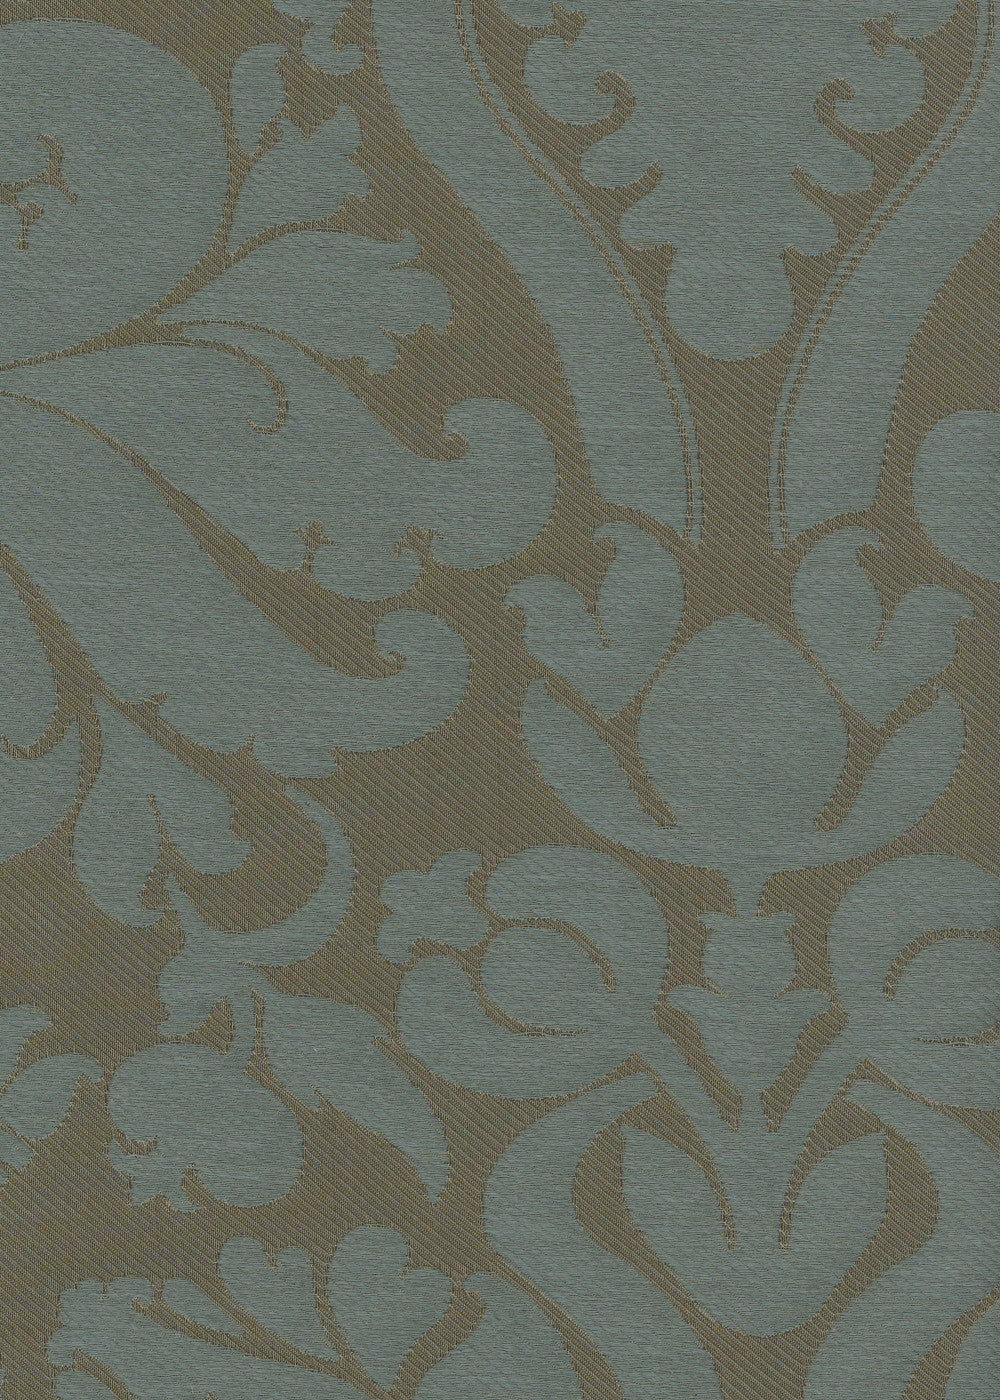 dark teal fabric with a woven damask design